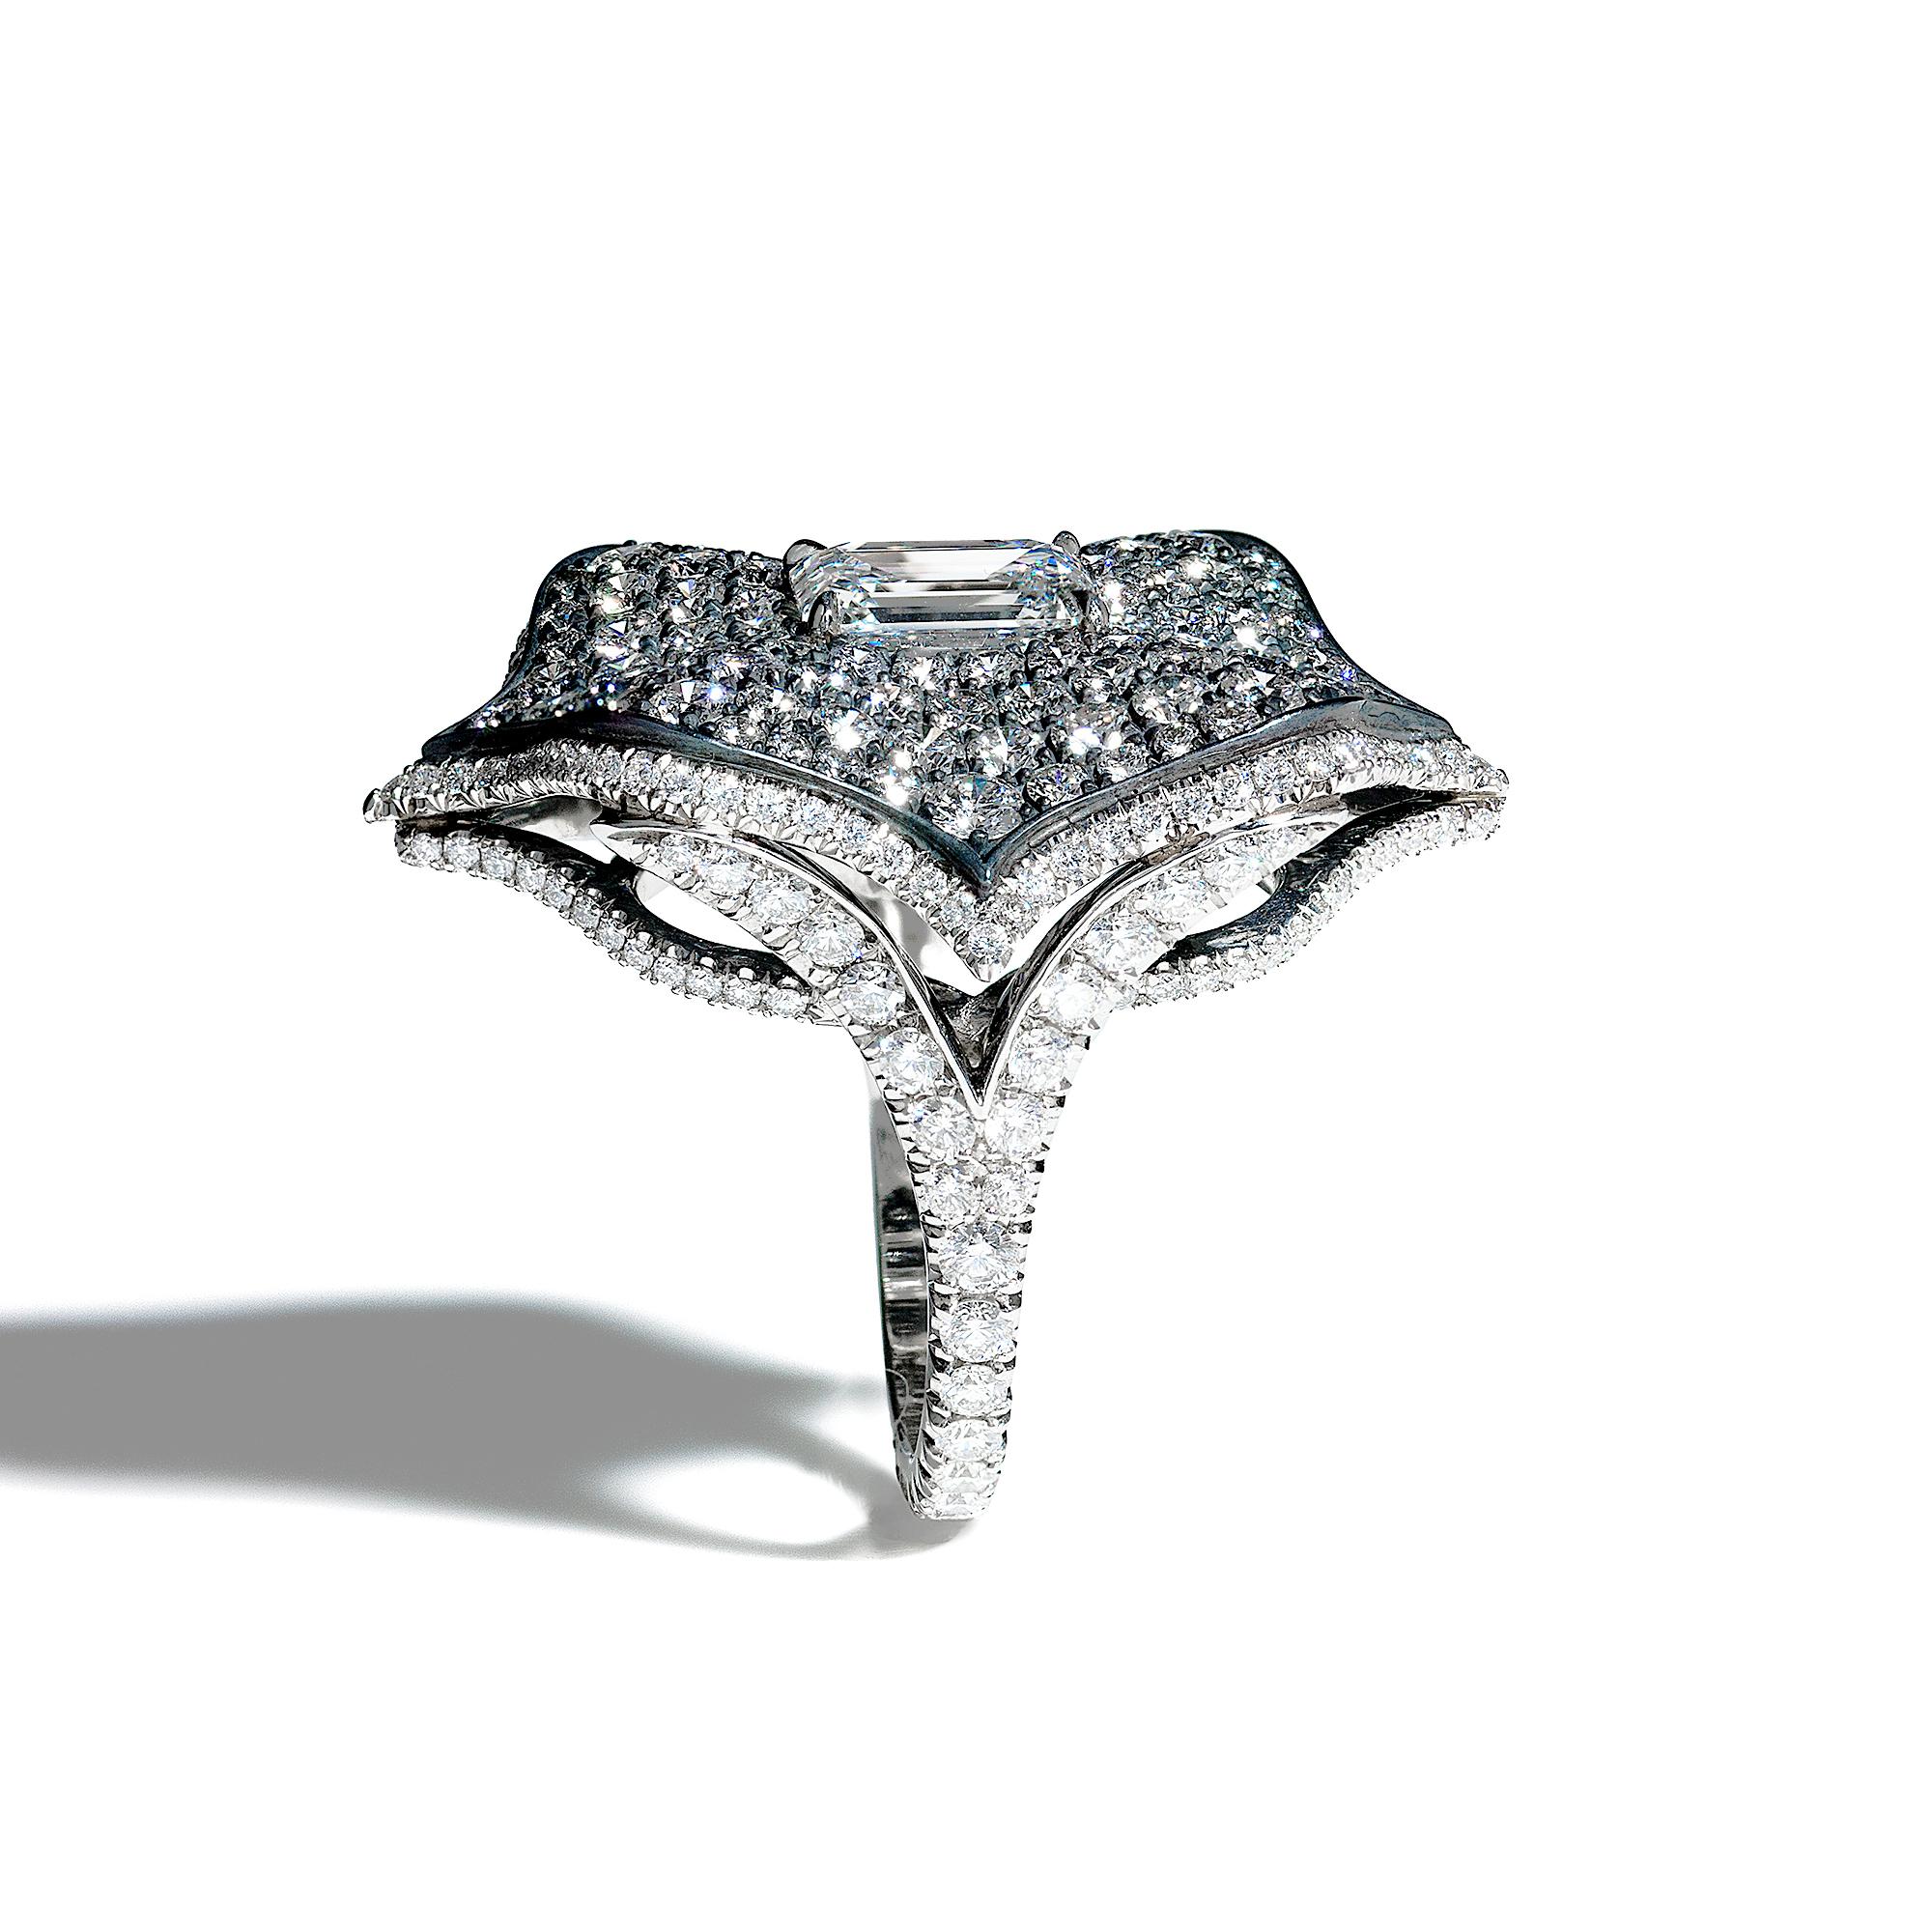 A beautiful Lotus ring centered upon a 1.85 carat G color VS2 clarity emerald-cut diamond, certified by GIA, set atop a bed of diamond pavé set in oxidized silver which is surrounded by a platinum frame set in diamond micropavé with diamond